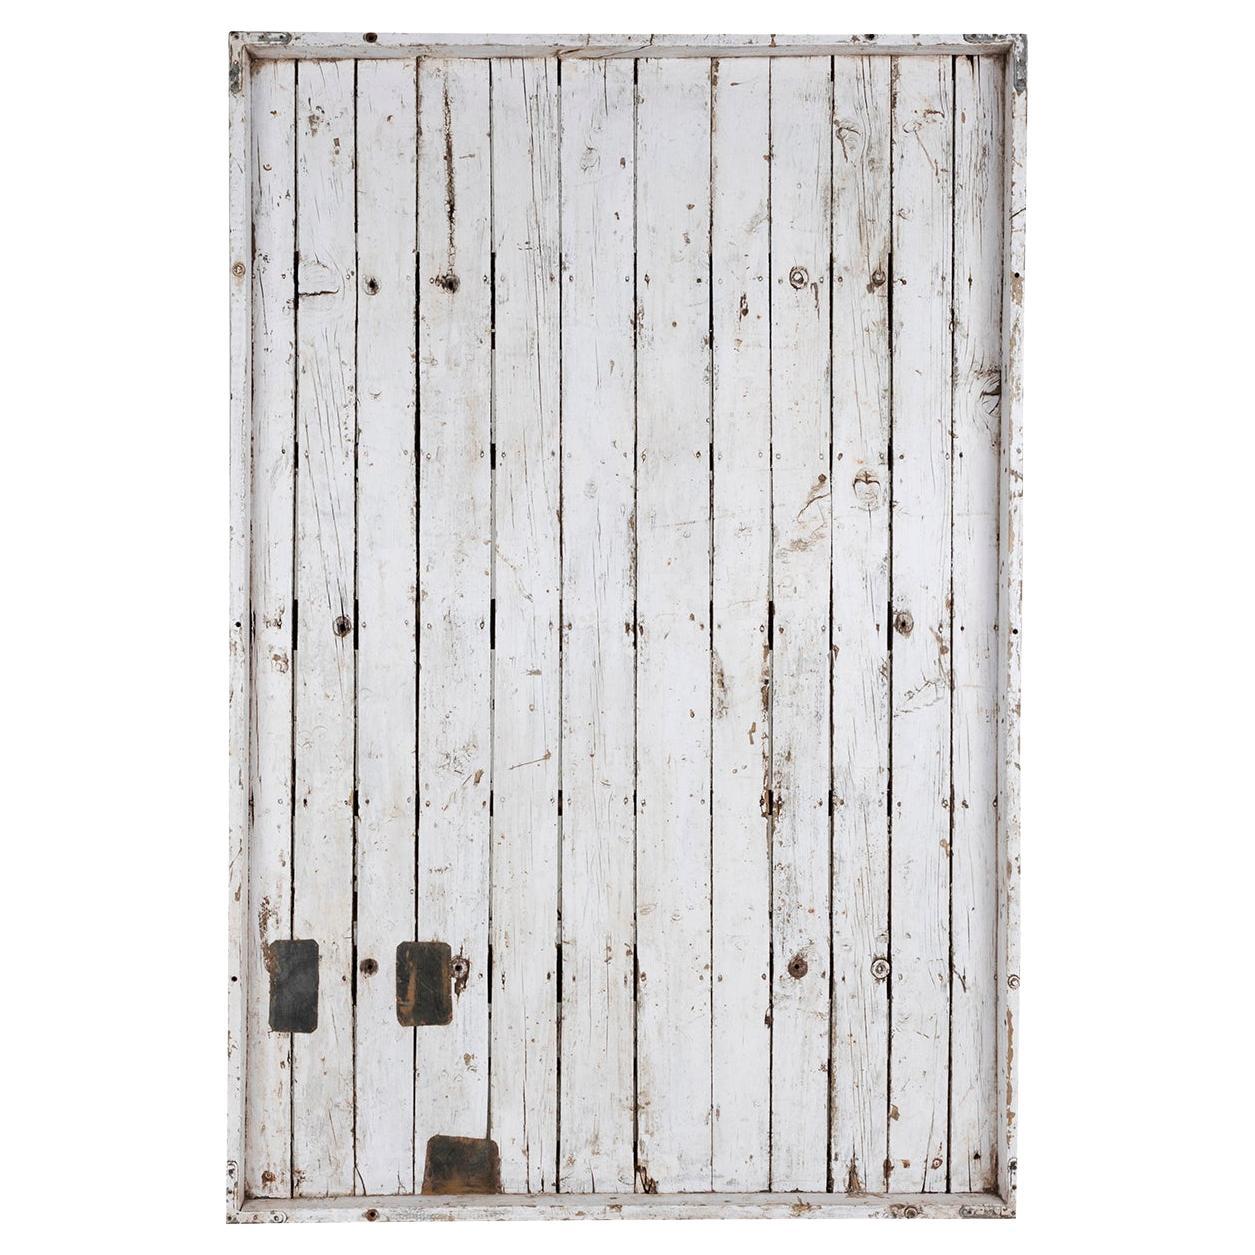 Reclaimed Wood Panel in Original White Paint Patina 